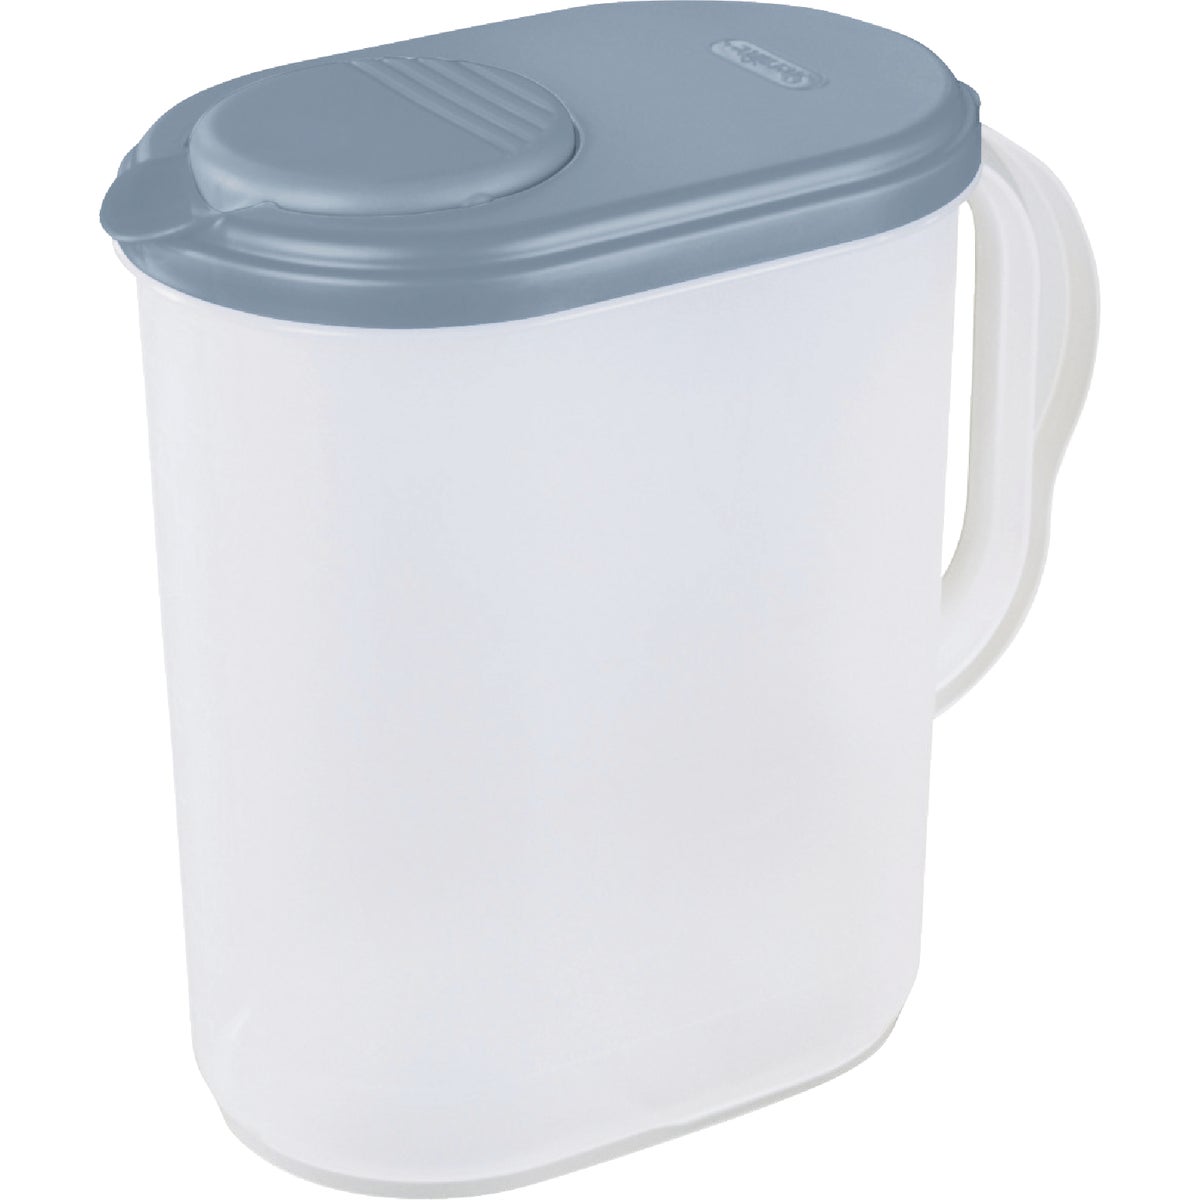 Sterilite UltraSeal 1 Gal. Frosted Plastic Pitcher with Pivot Top Spout